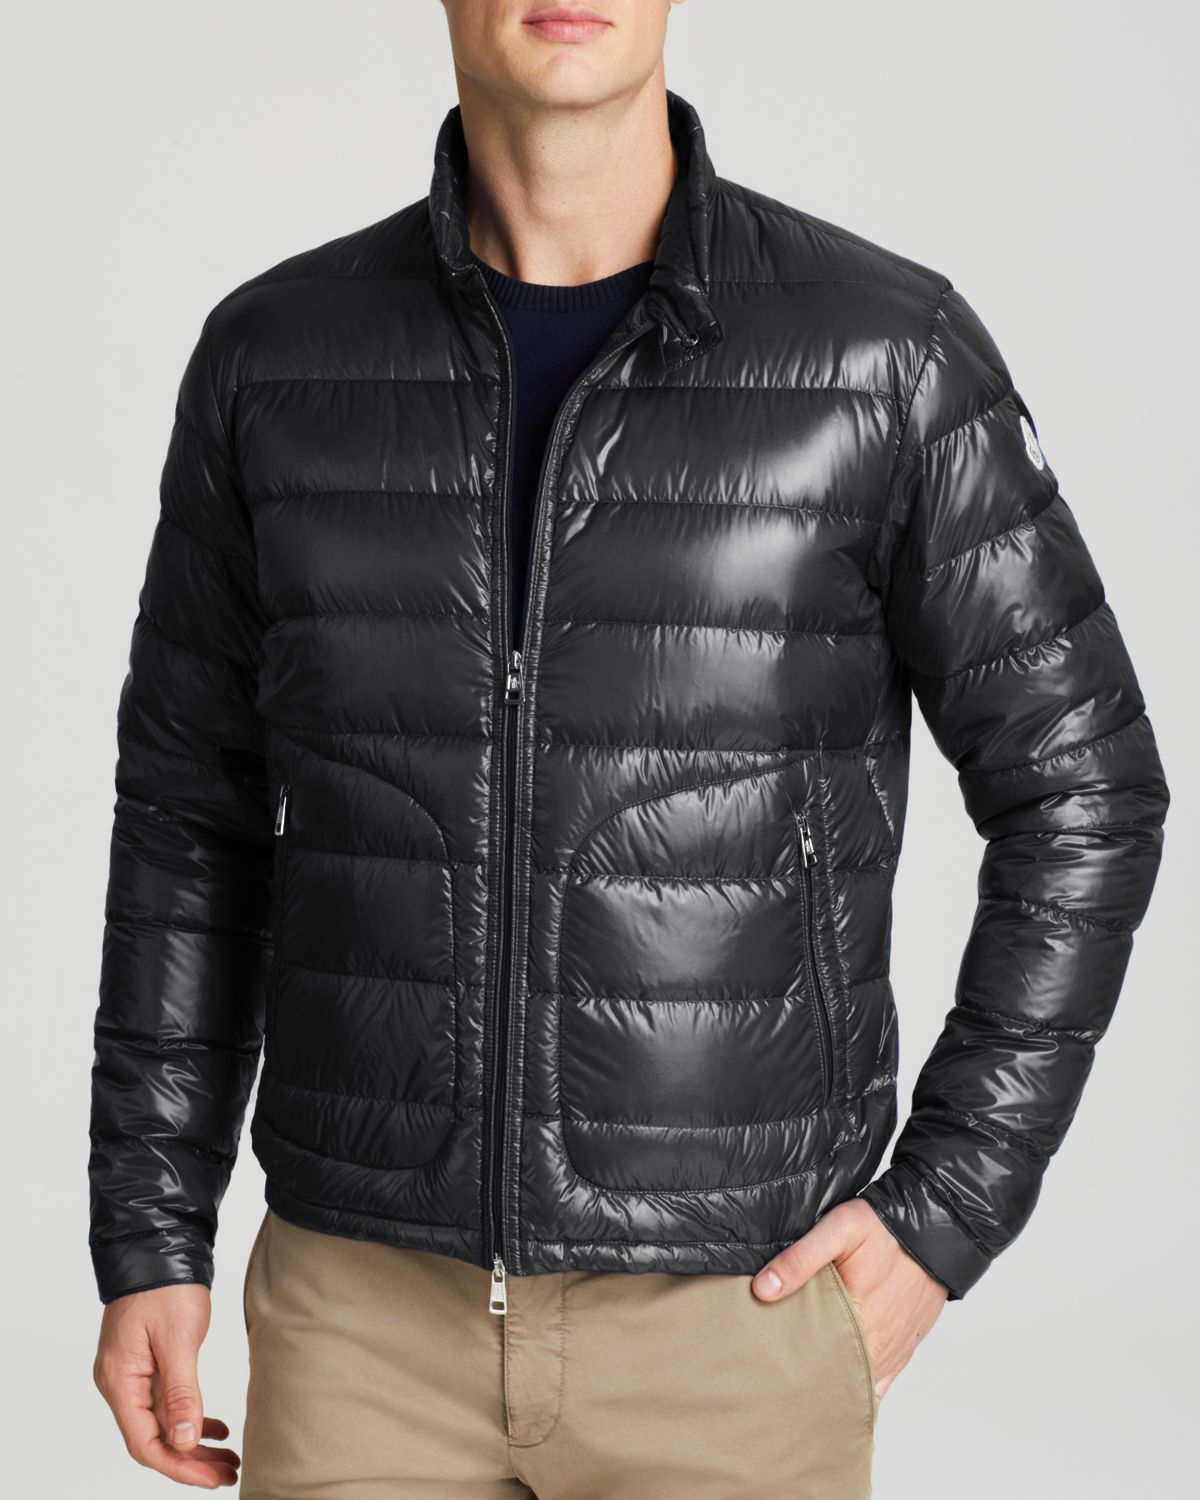 Moncler Acorus Down Jacket in Graphite (Gray) for Men - Lyst